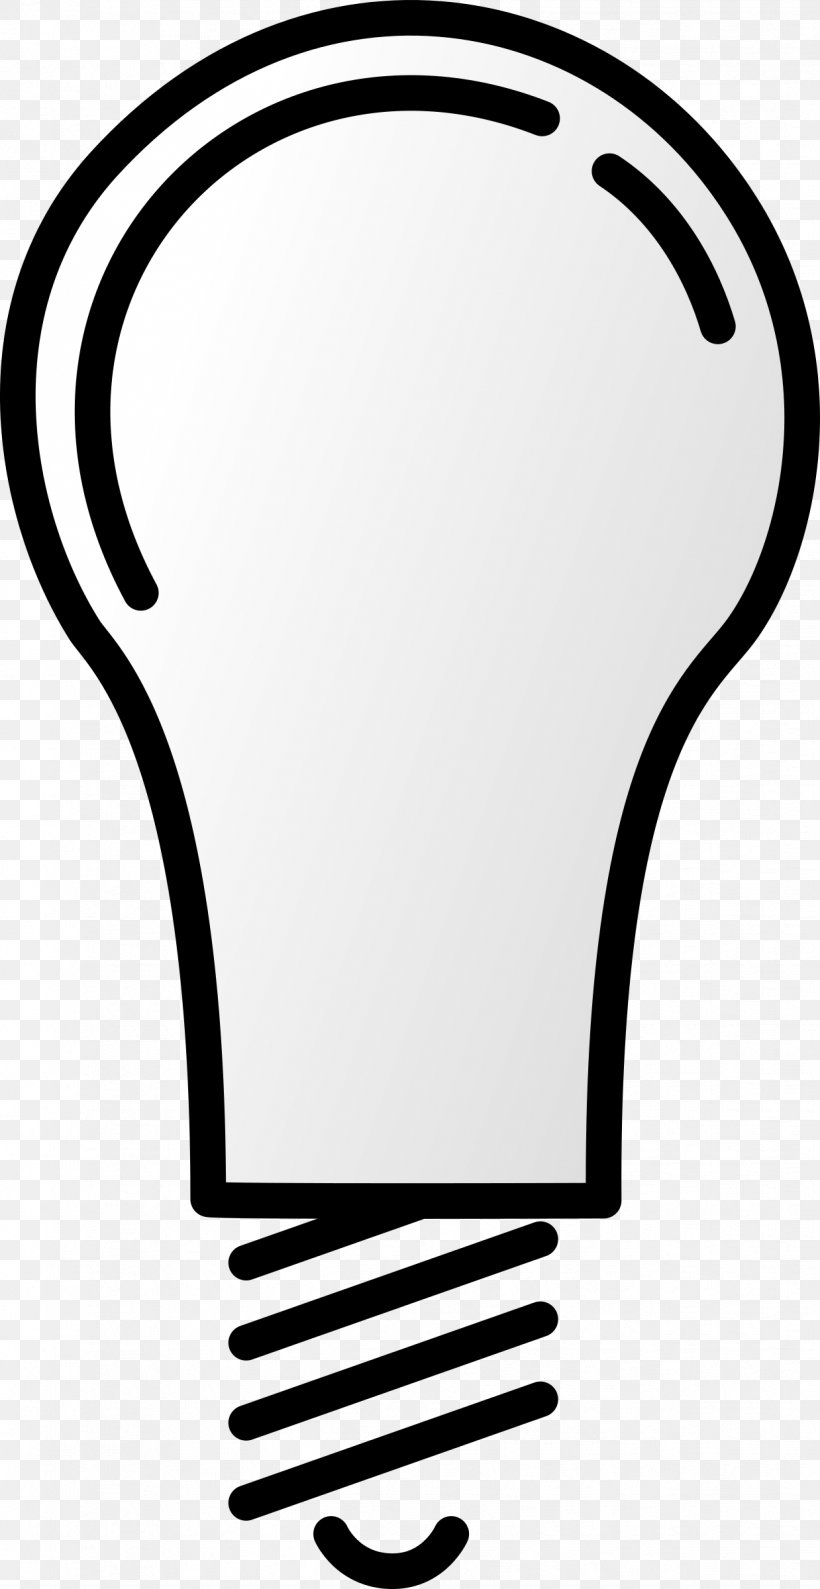 Incandescent Light Bulb Lamp Clip Art, PNG, 1238x2400px, Light, Black And White, Drawing, Electric Light, Electricity Download Free